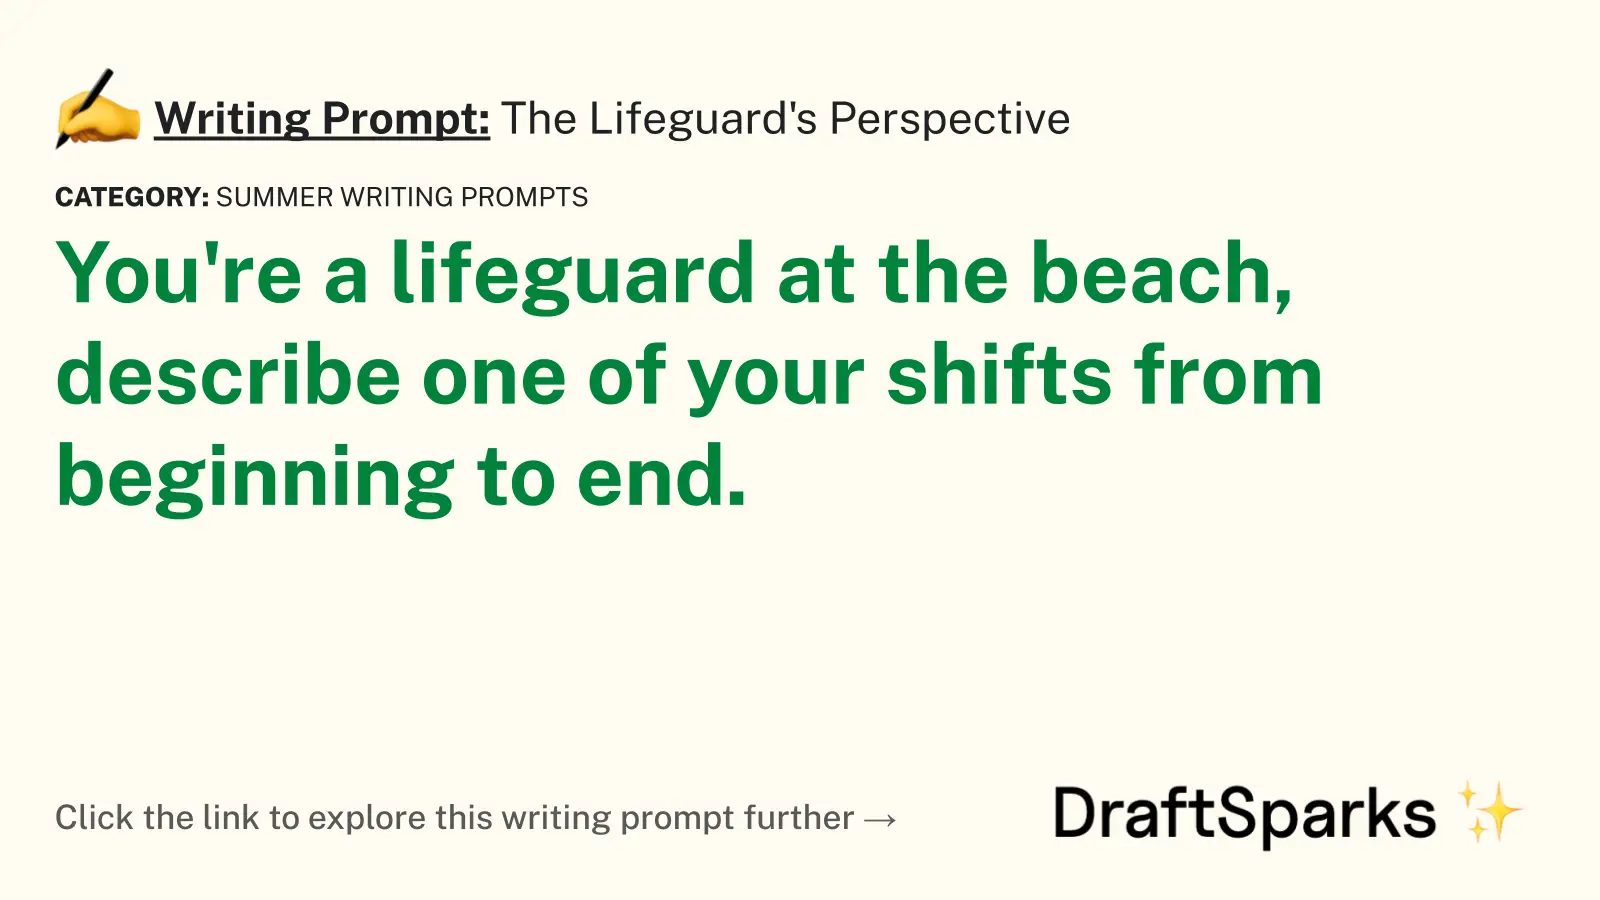 The Lifeguard’s Perspective